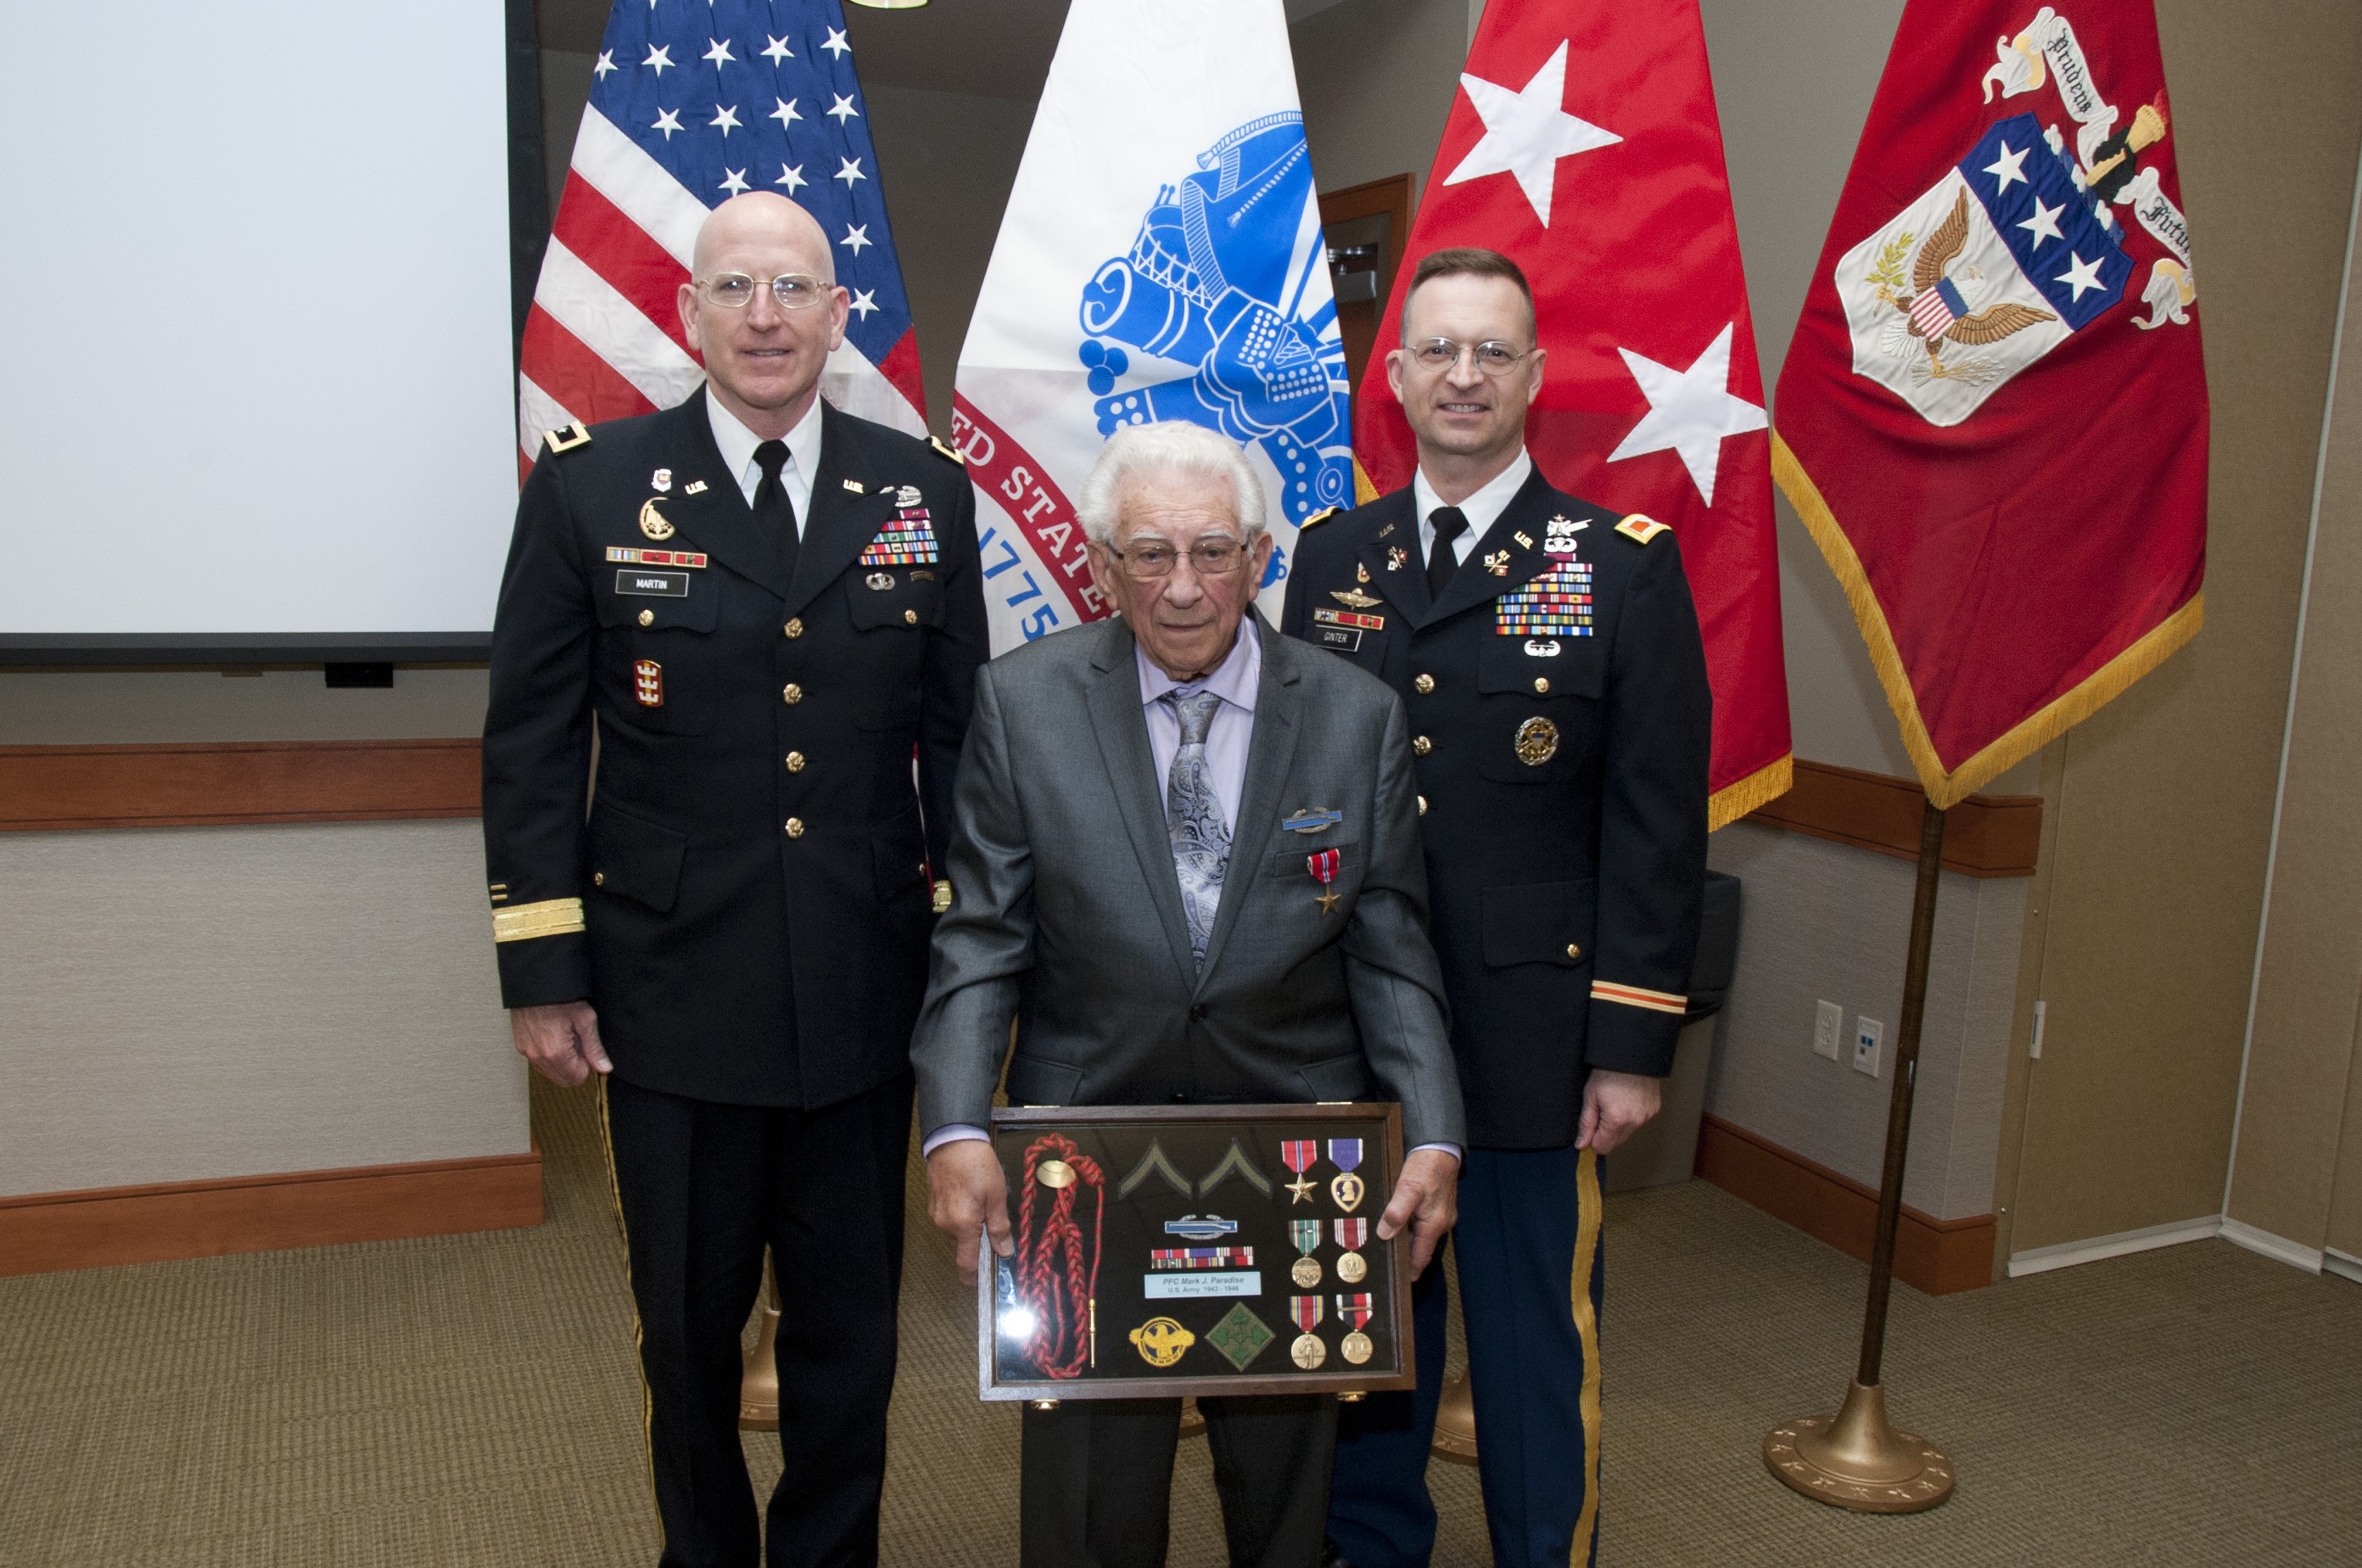 World War Ii Vet Finally Receives Medals For His Service Article The United States Army